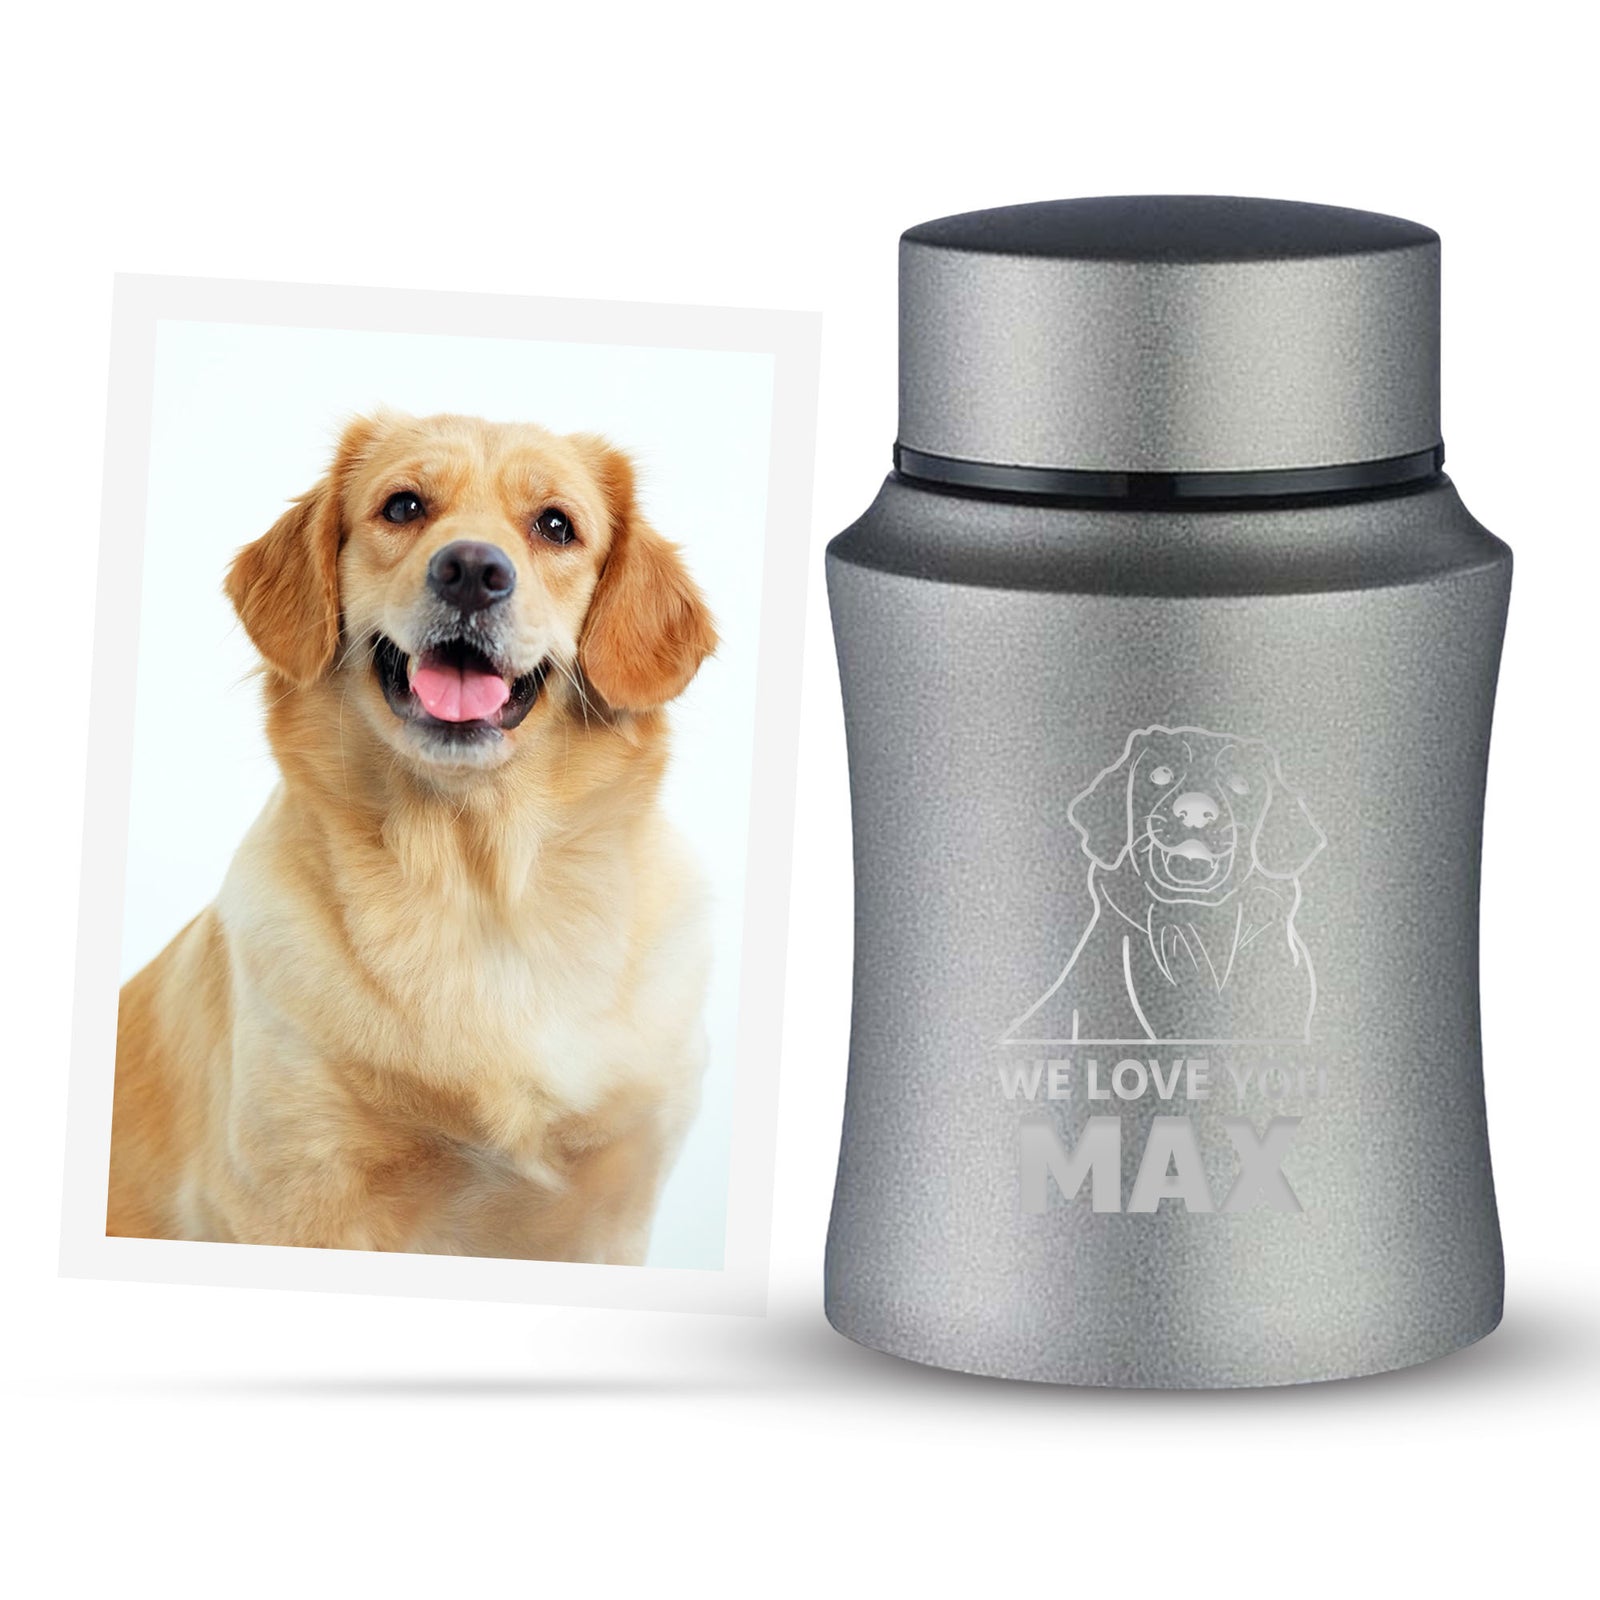 Custom Engraved Pet Photo/Image Keepsake Urn - Personalized with Pet Name, Date, and Pet Image - 4" Powder Coated Steel Cremation Mini Compact Urn for Pets Ashes, Washed Gold , Powder Blue , Gray | 5–10 Lbs Capacity